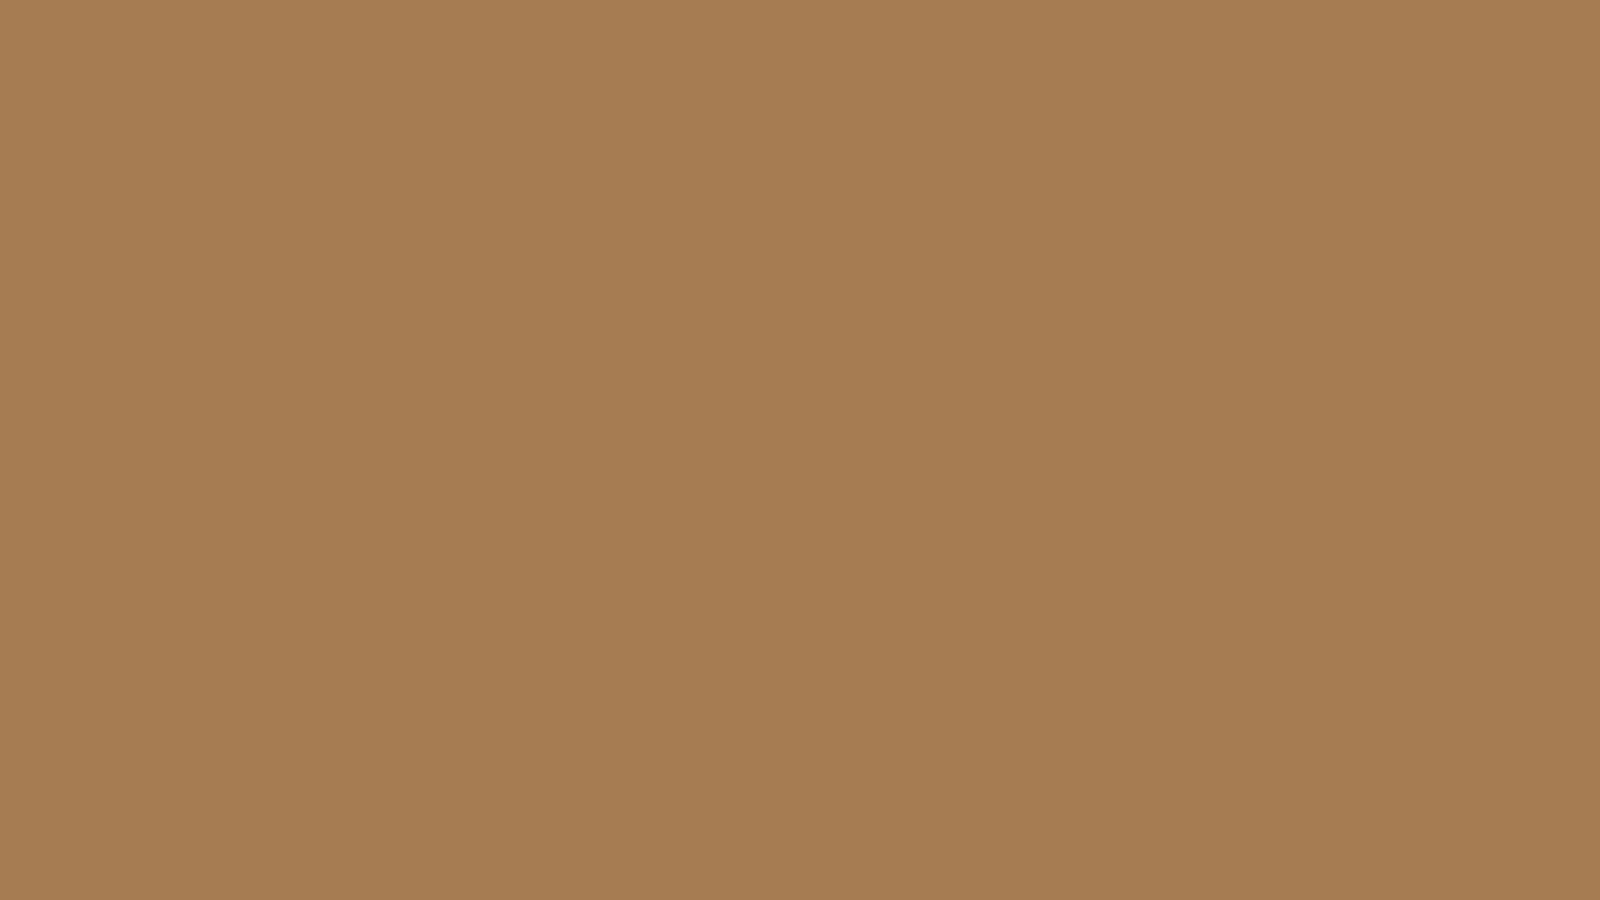 Zinnwaldite Brown Solid Color Background Wallpaper for Mobile Phone